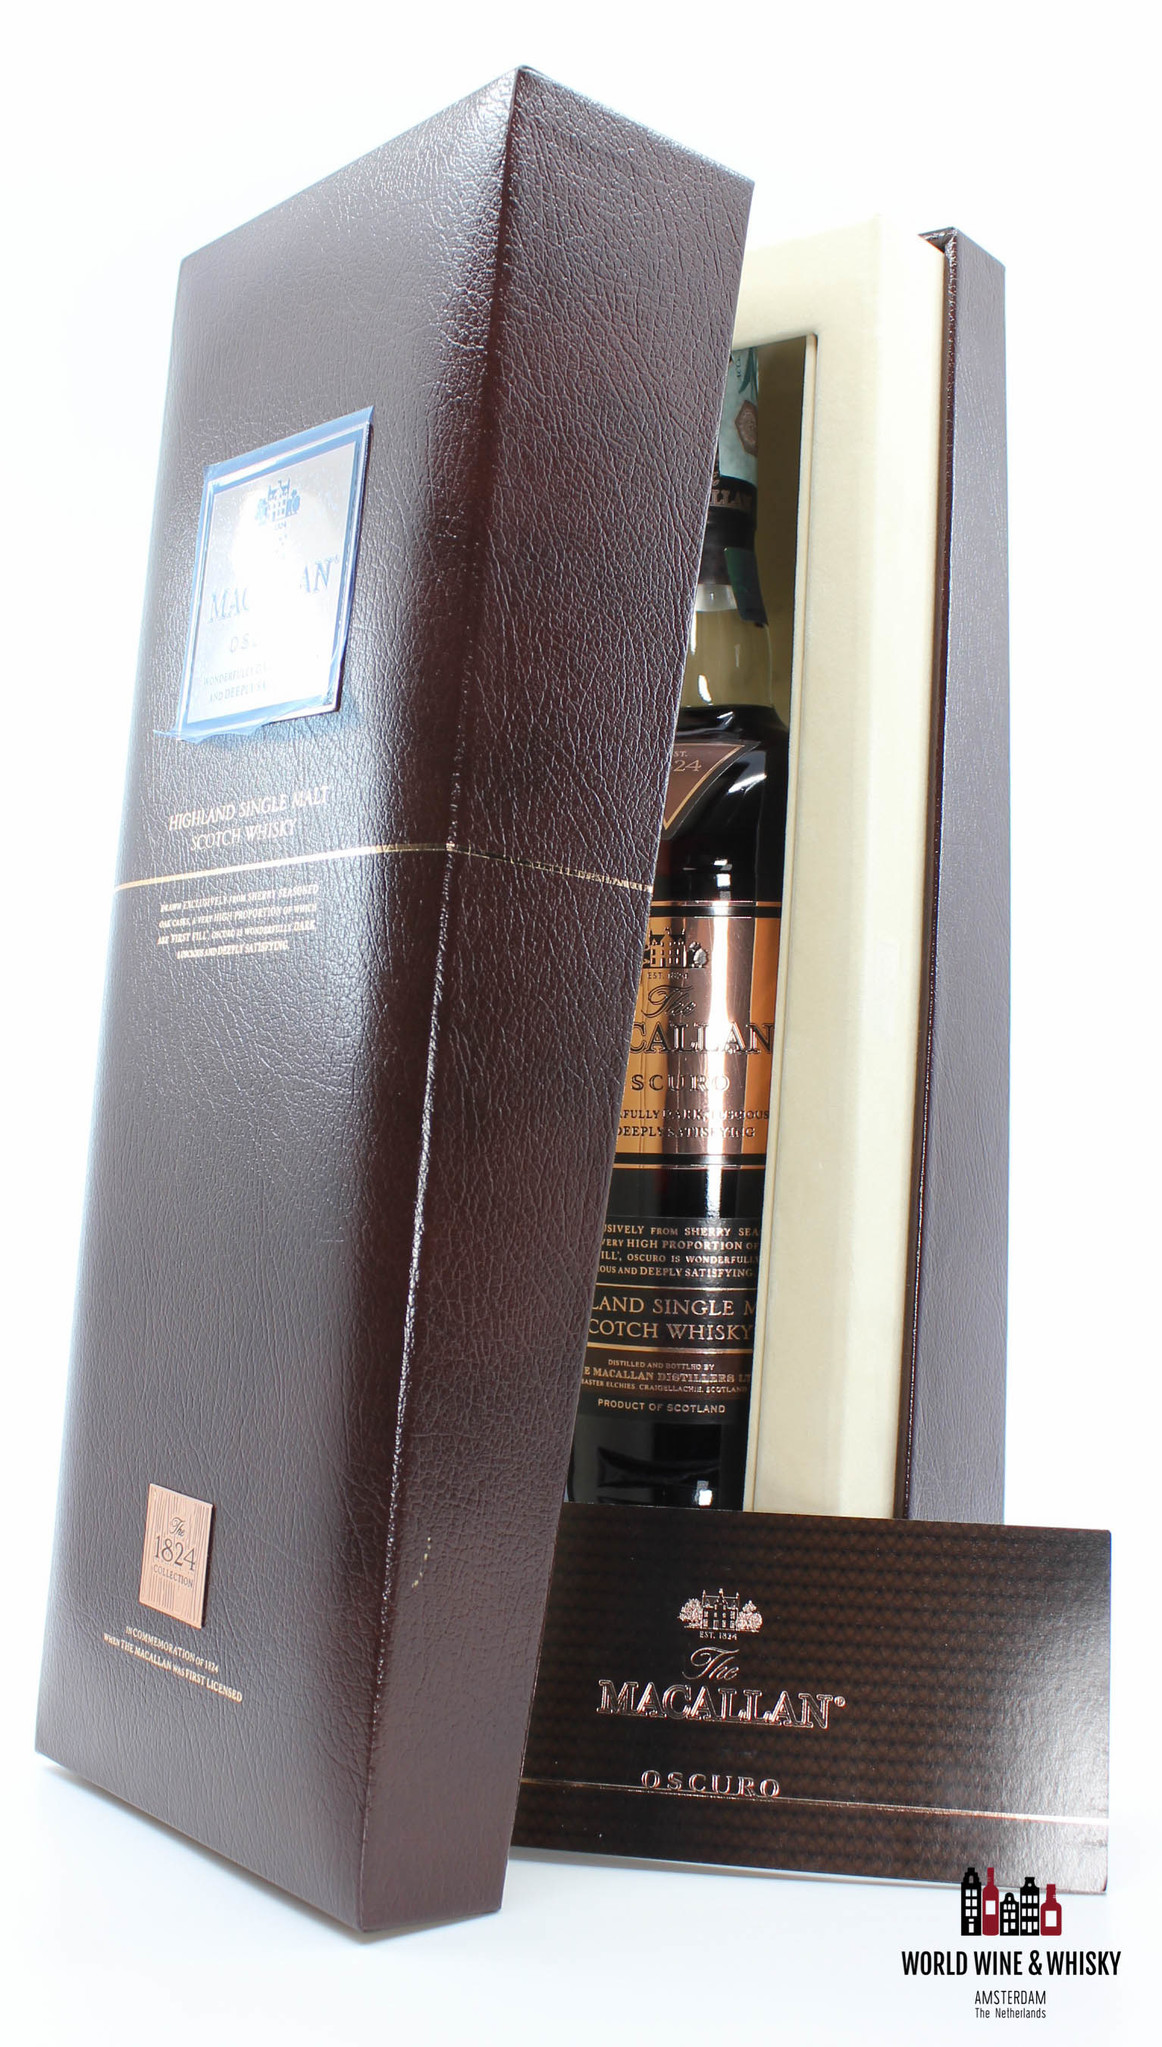 Macallan Macallan Oscuro 2010 - 1824 Collection 46.5% (in luxury case)